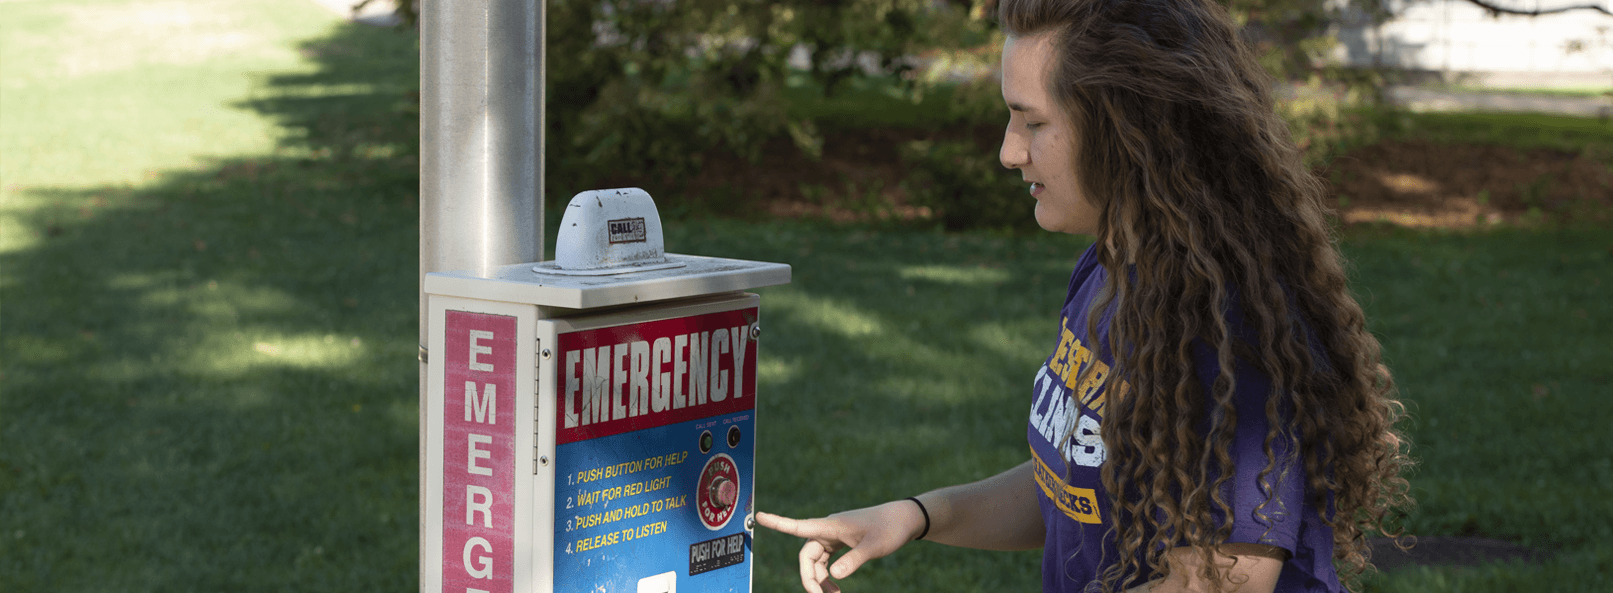 A student infront of an emergency call box.